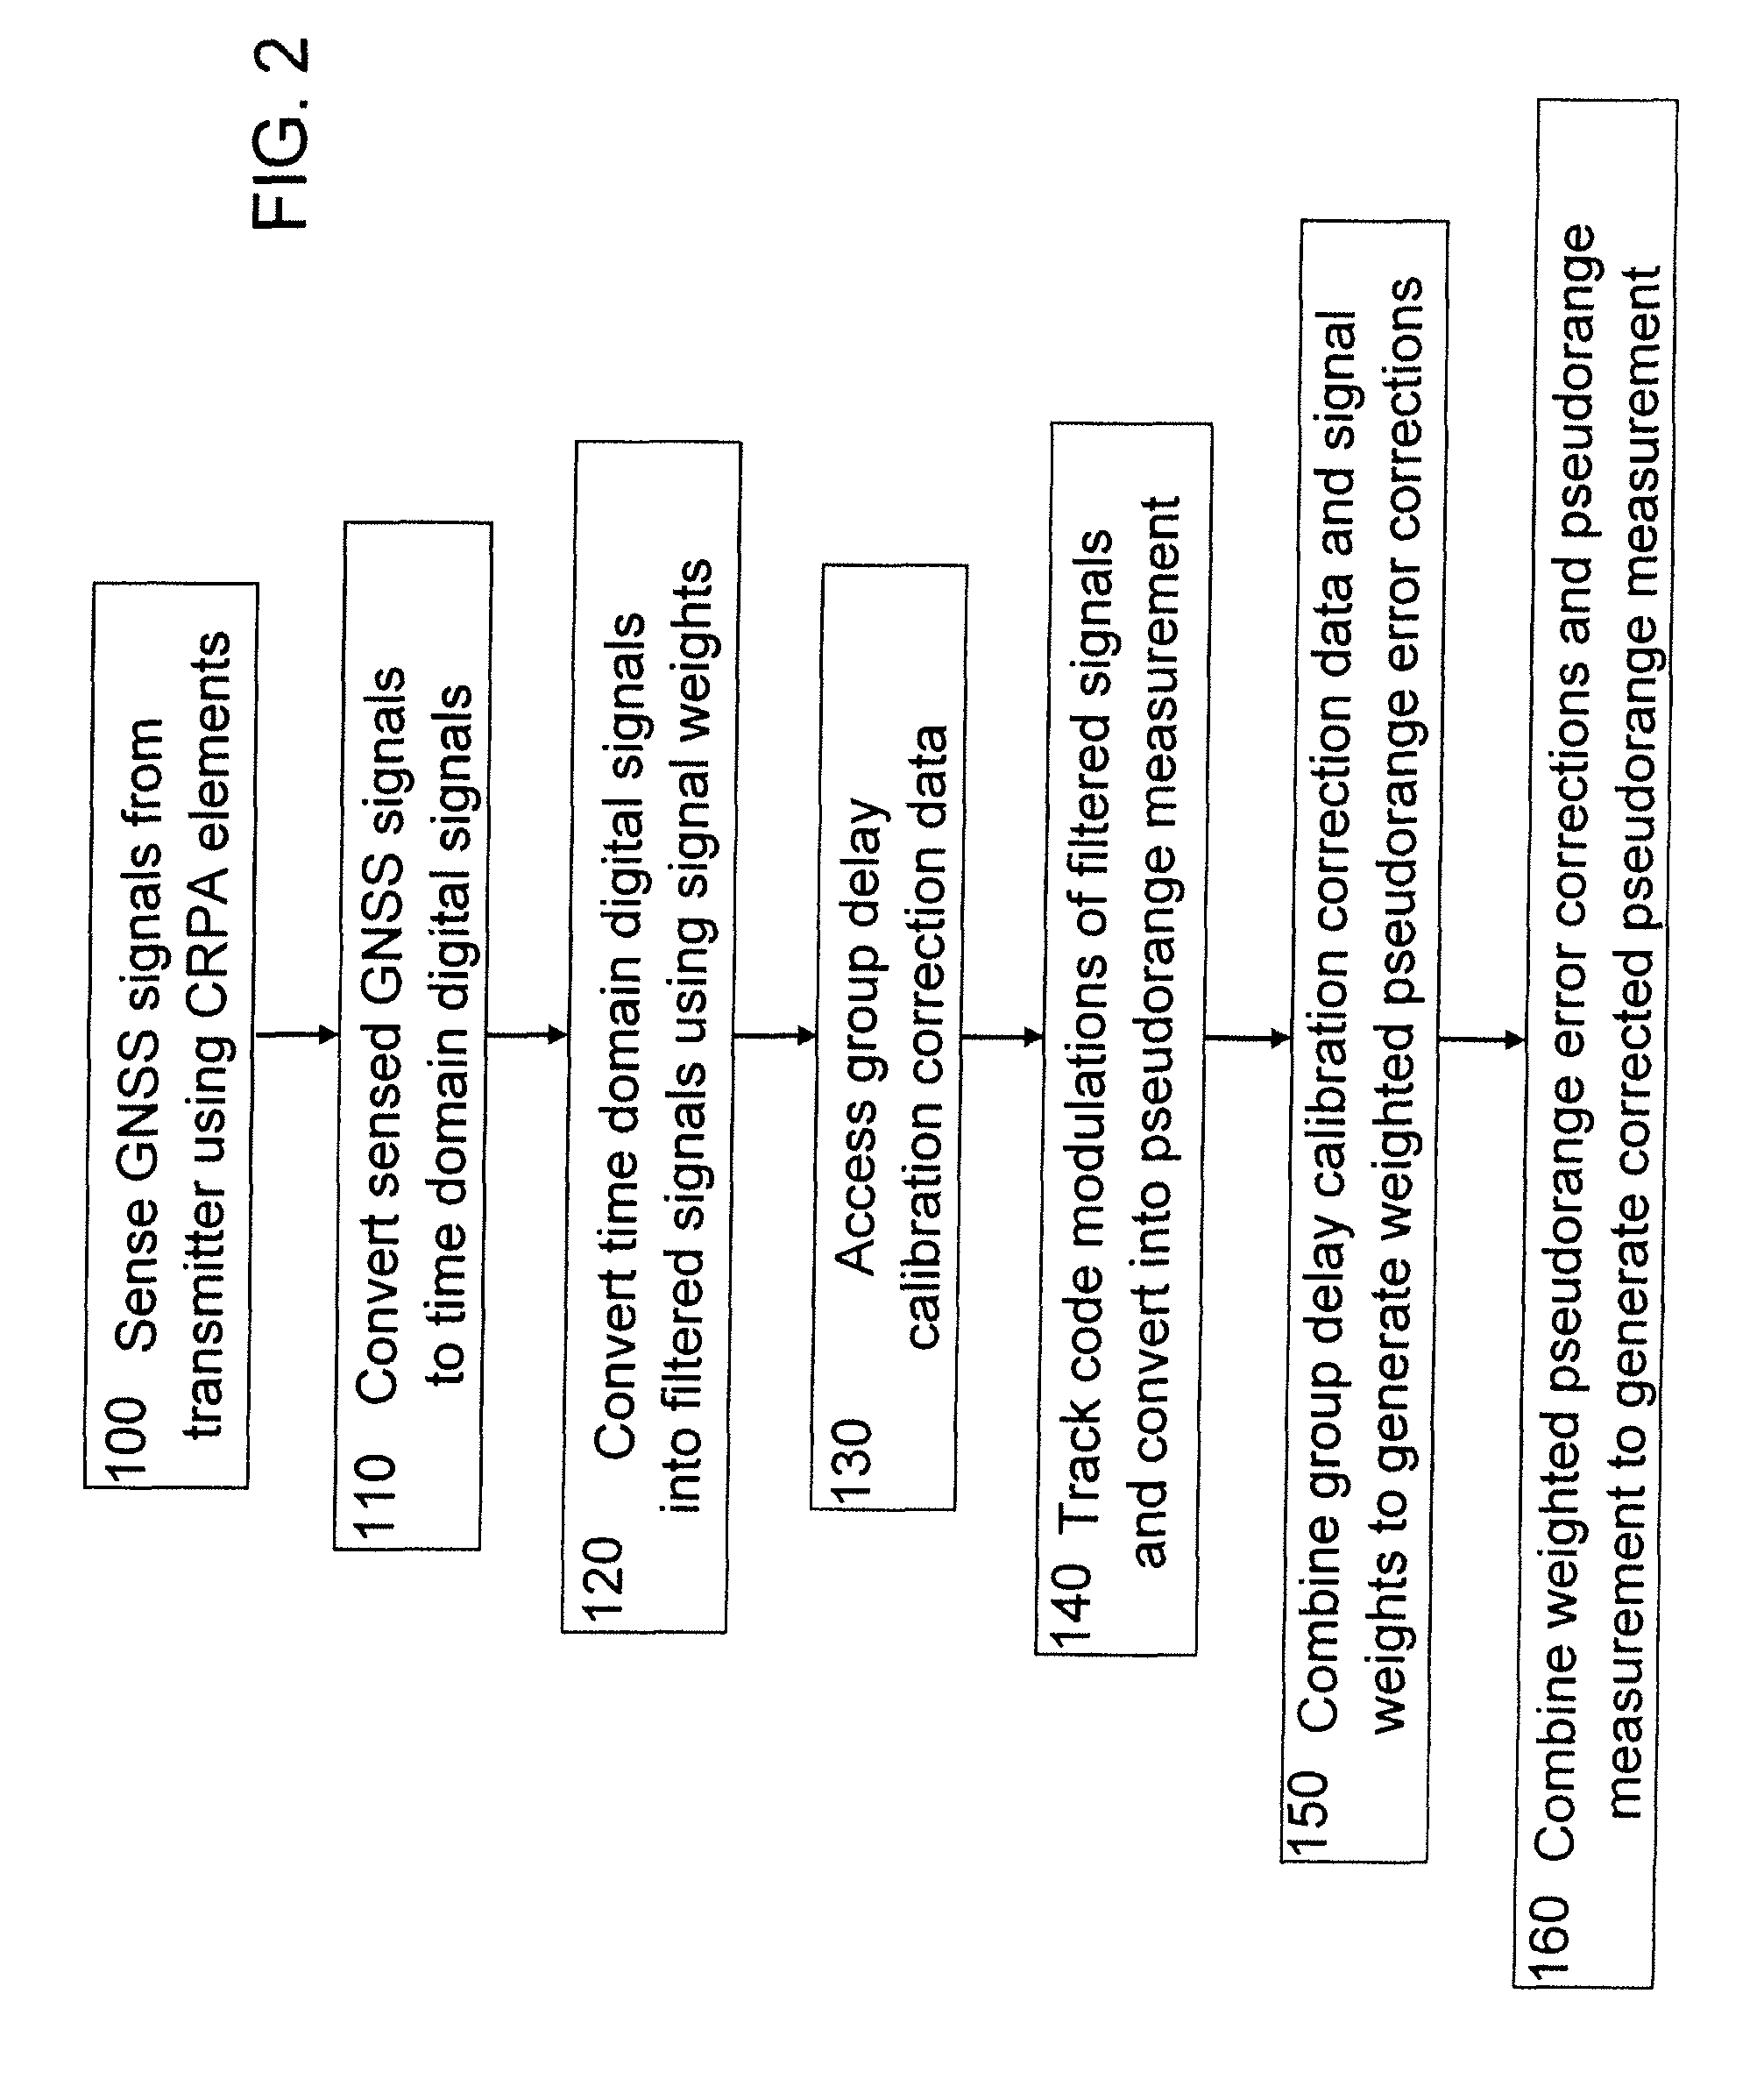 System and method for correcting global navigation satellite system pseudorange measurements in receivers having controlled reception pattern antennas